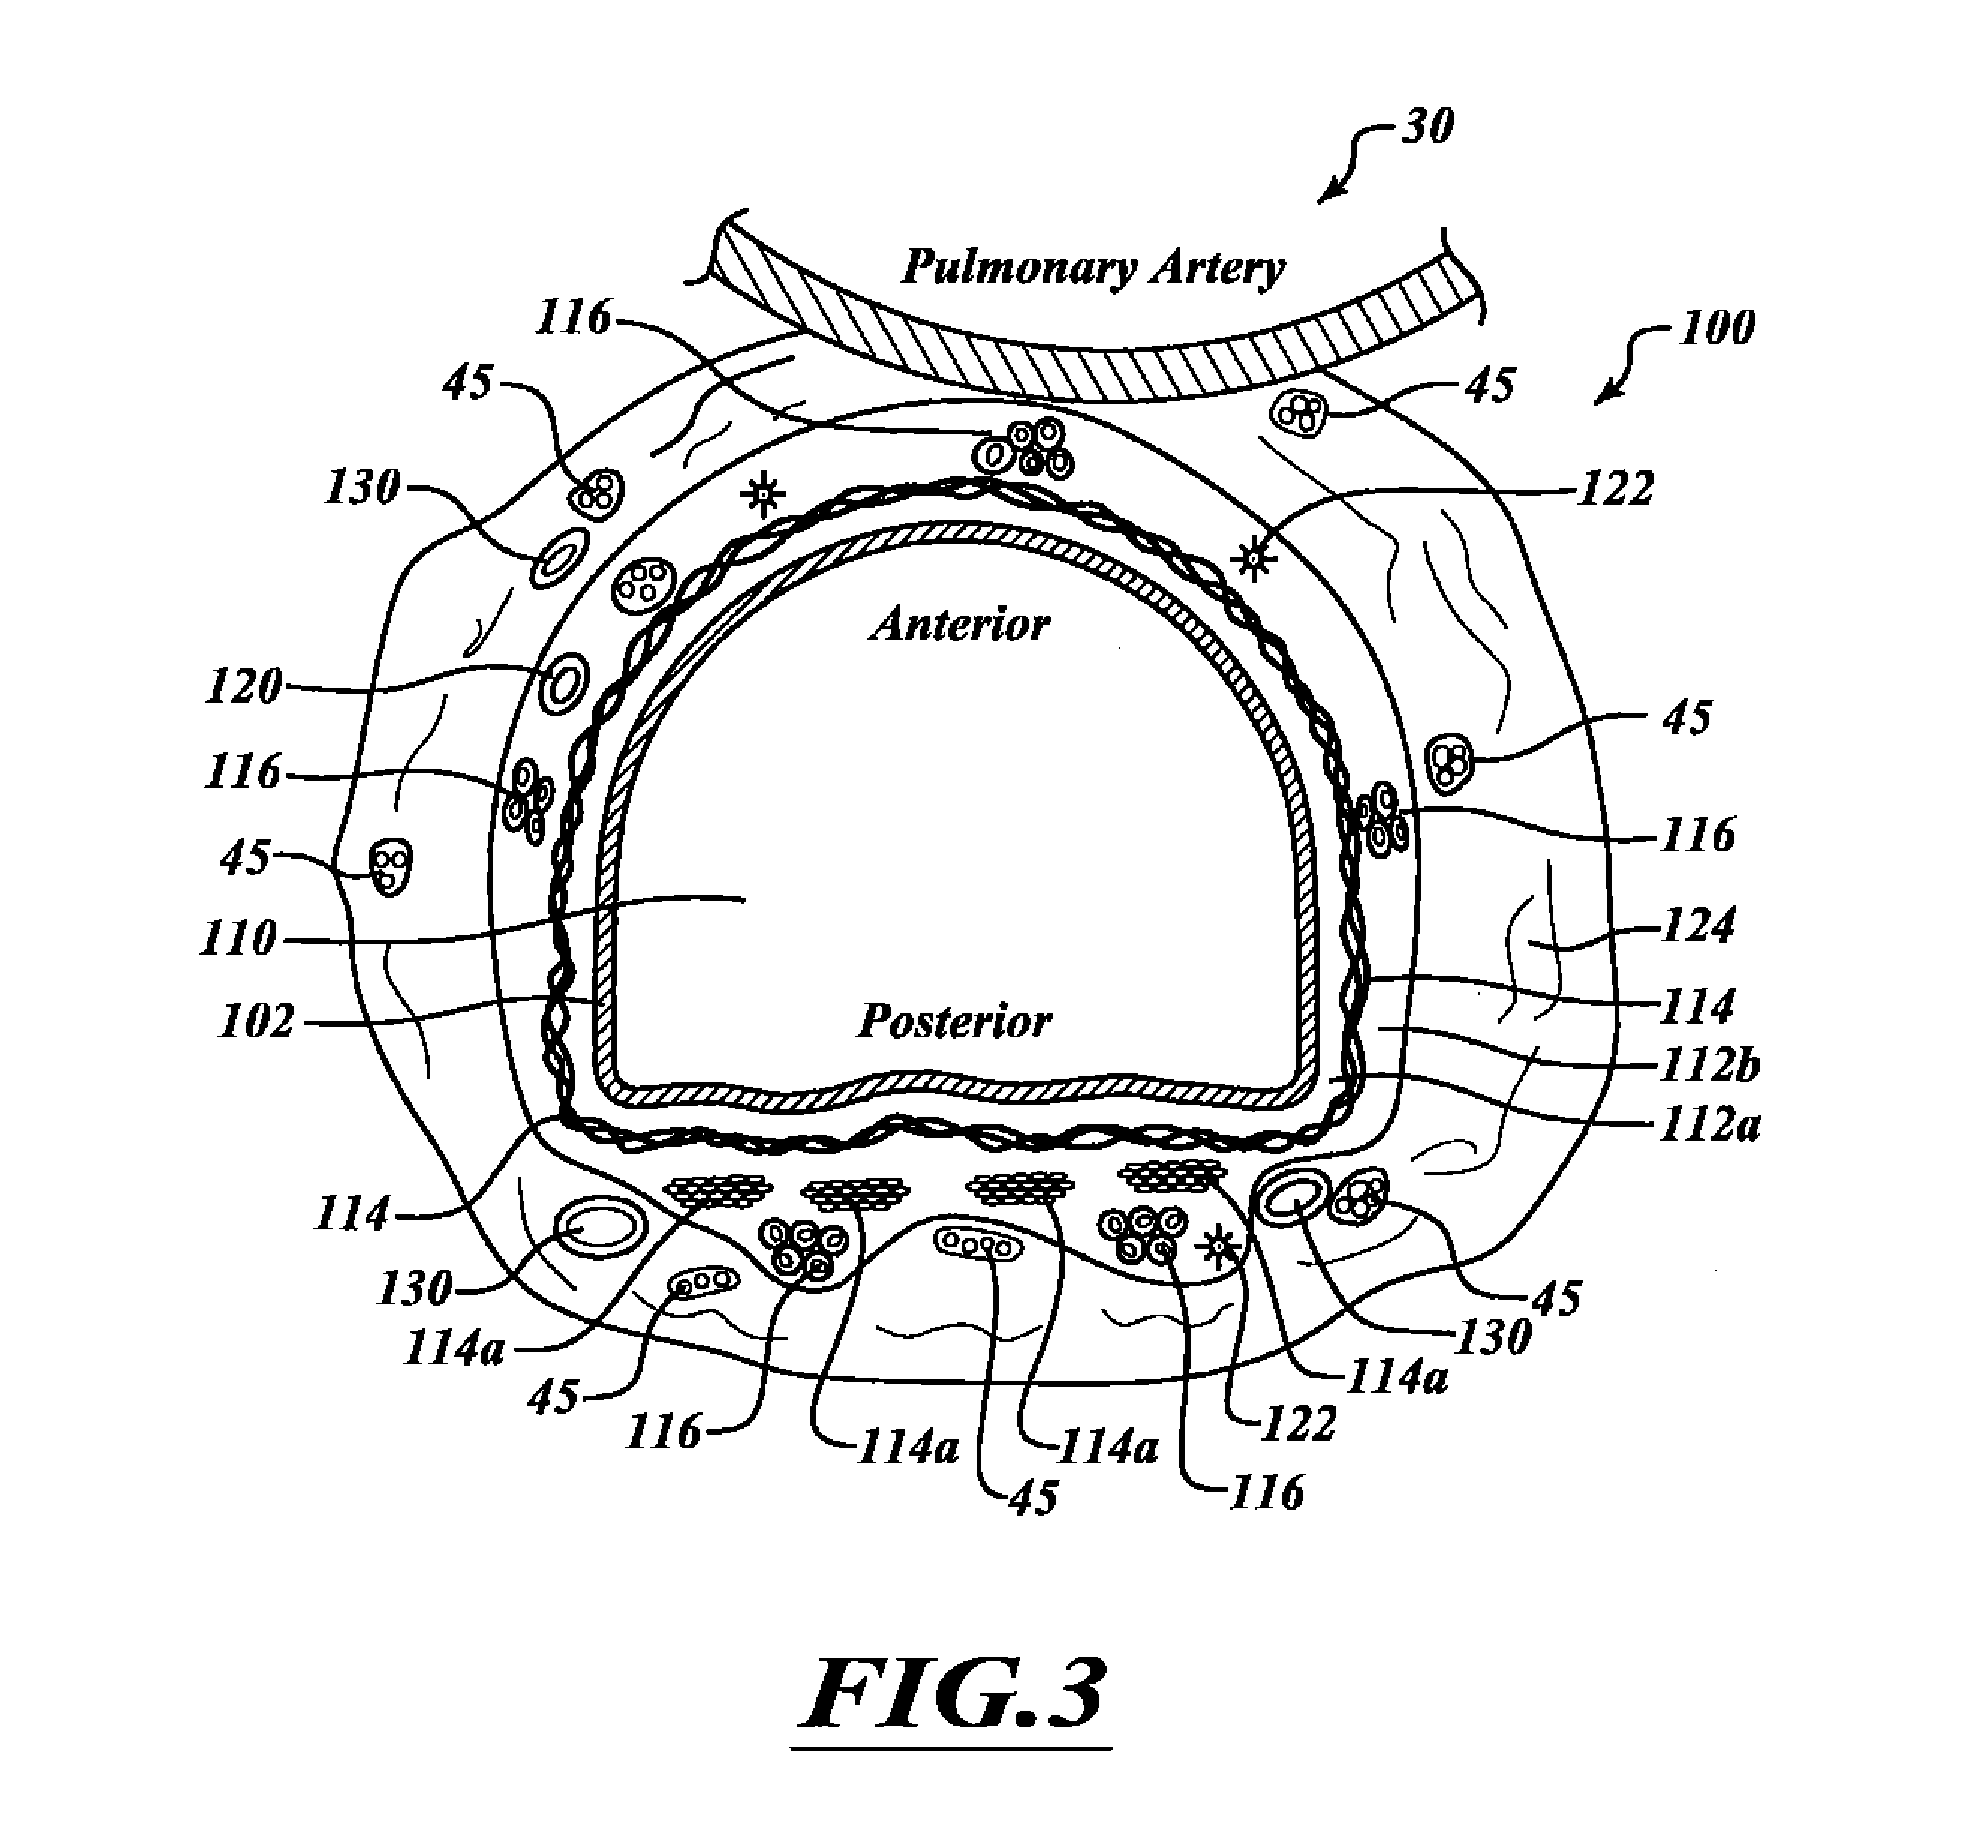 Systems, devices, and methods for treating a pulmonary disorder with an agent